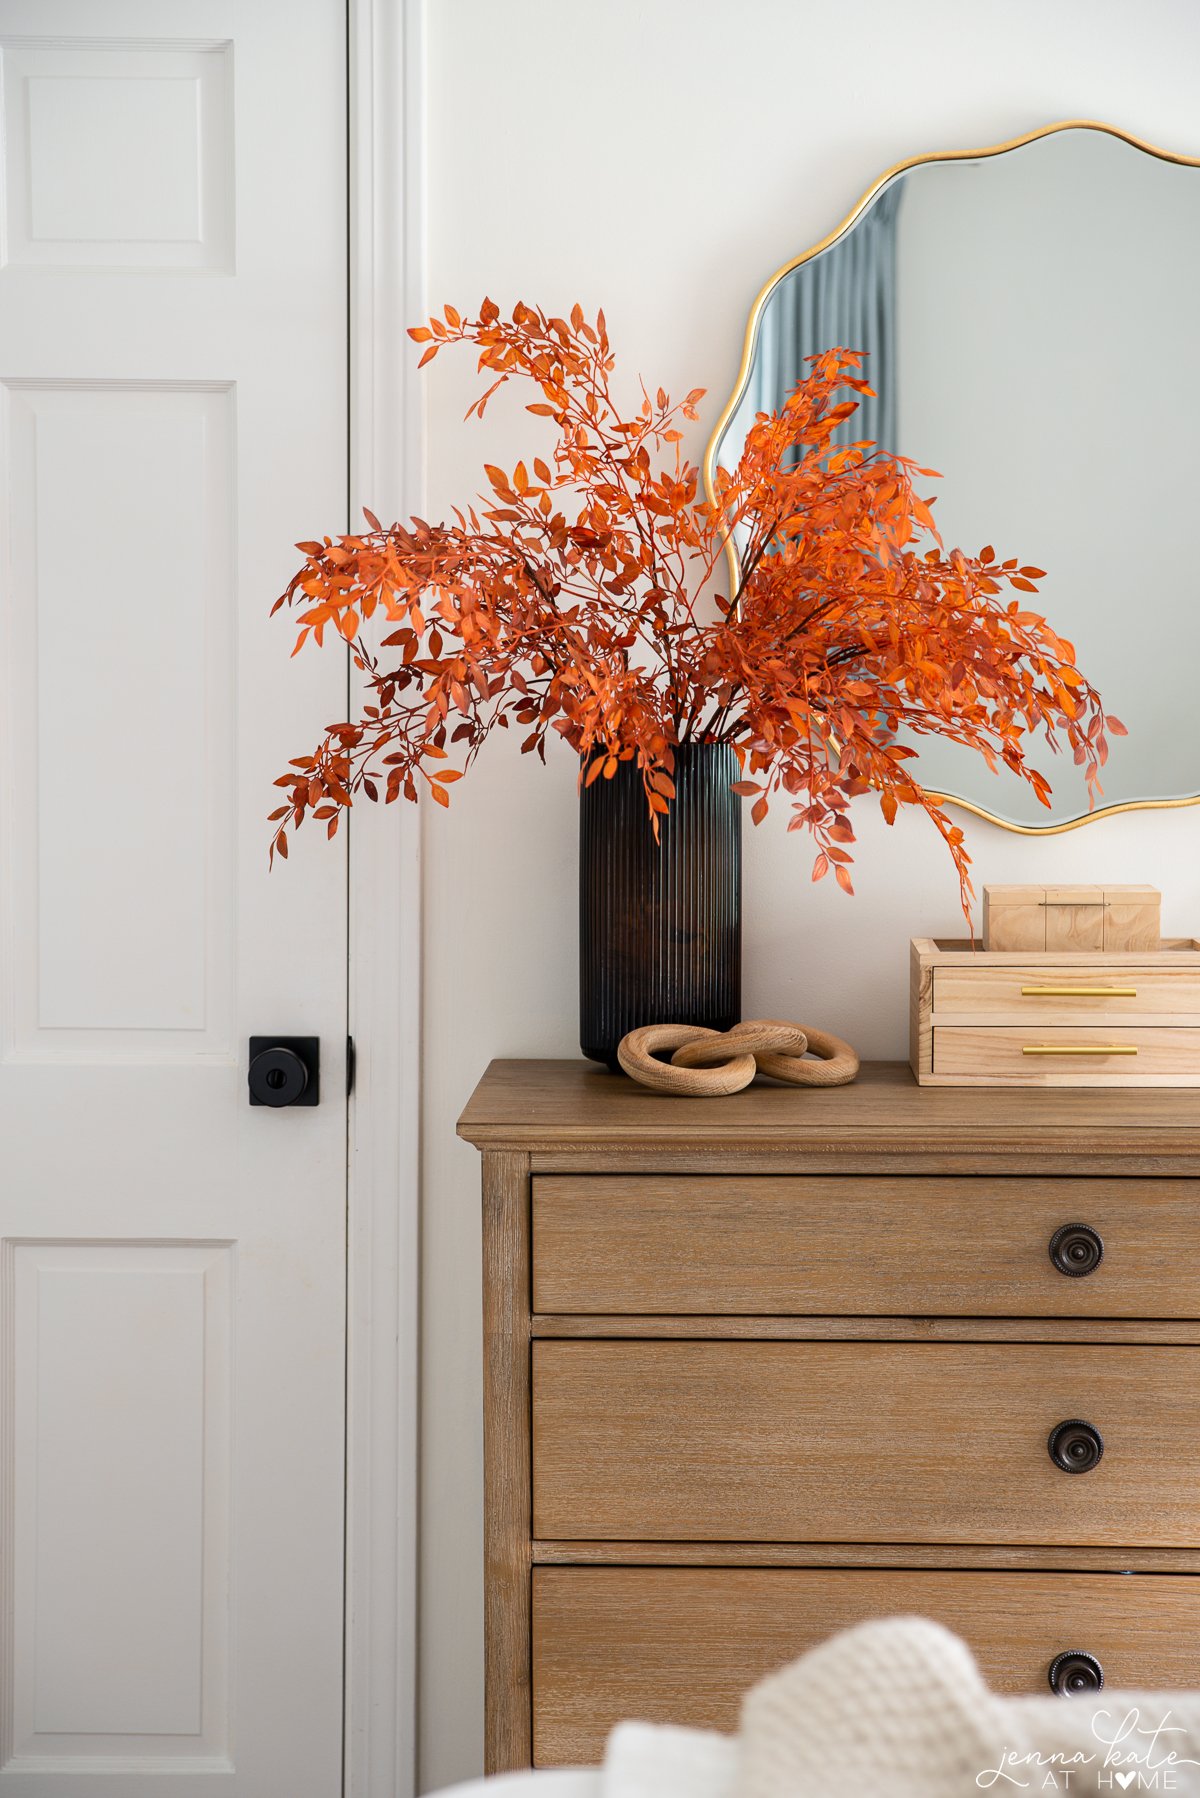 wooden dresser with orange fall stems in a glass vase